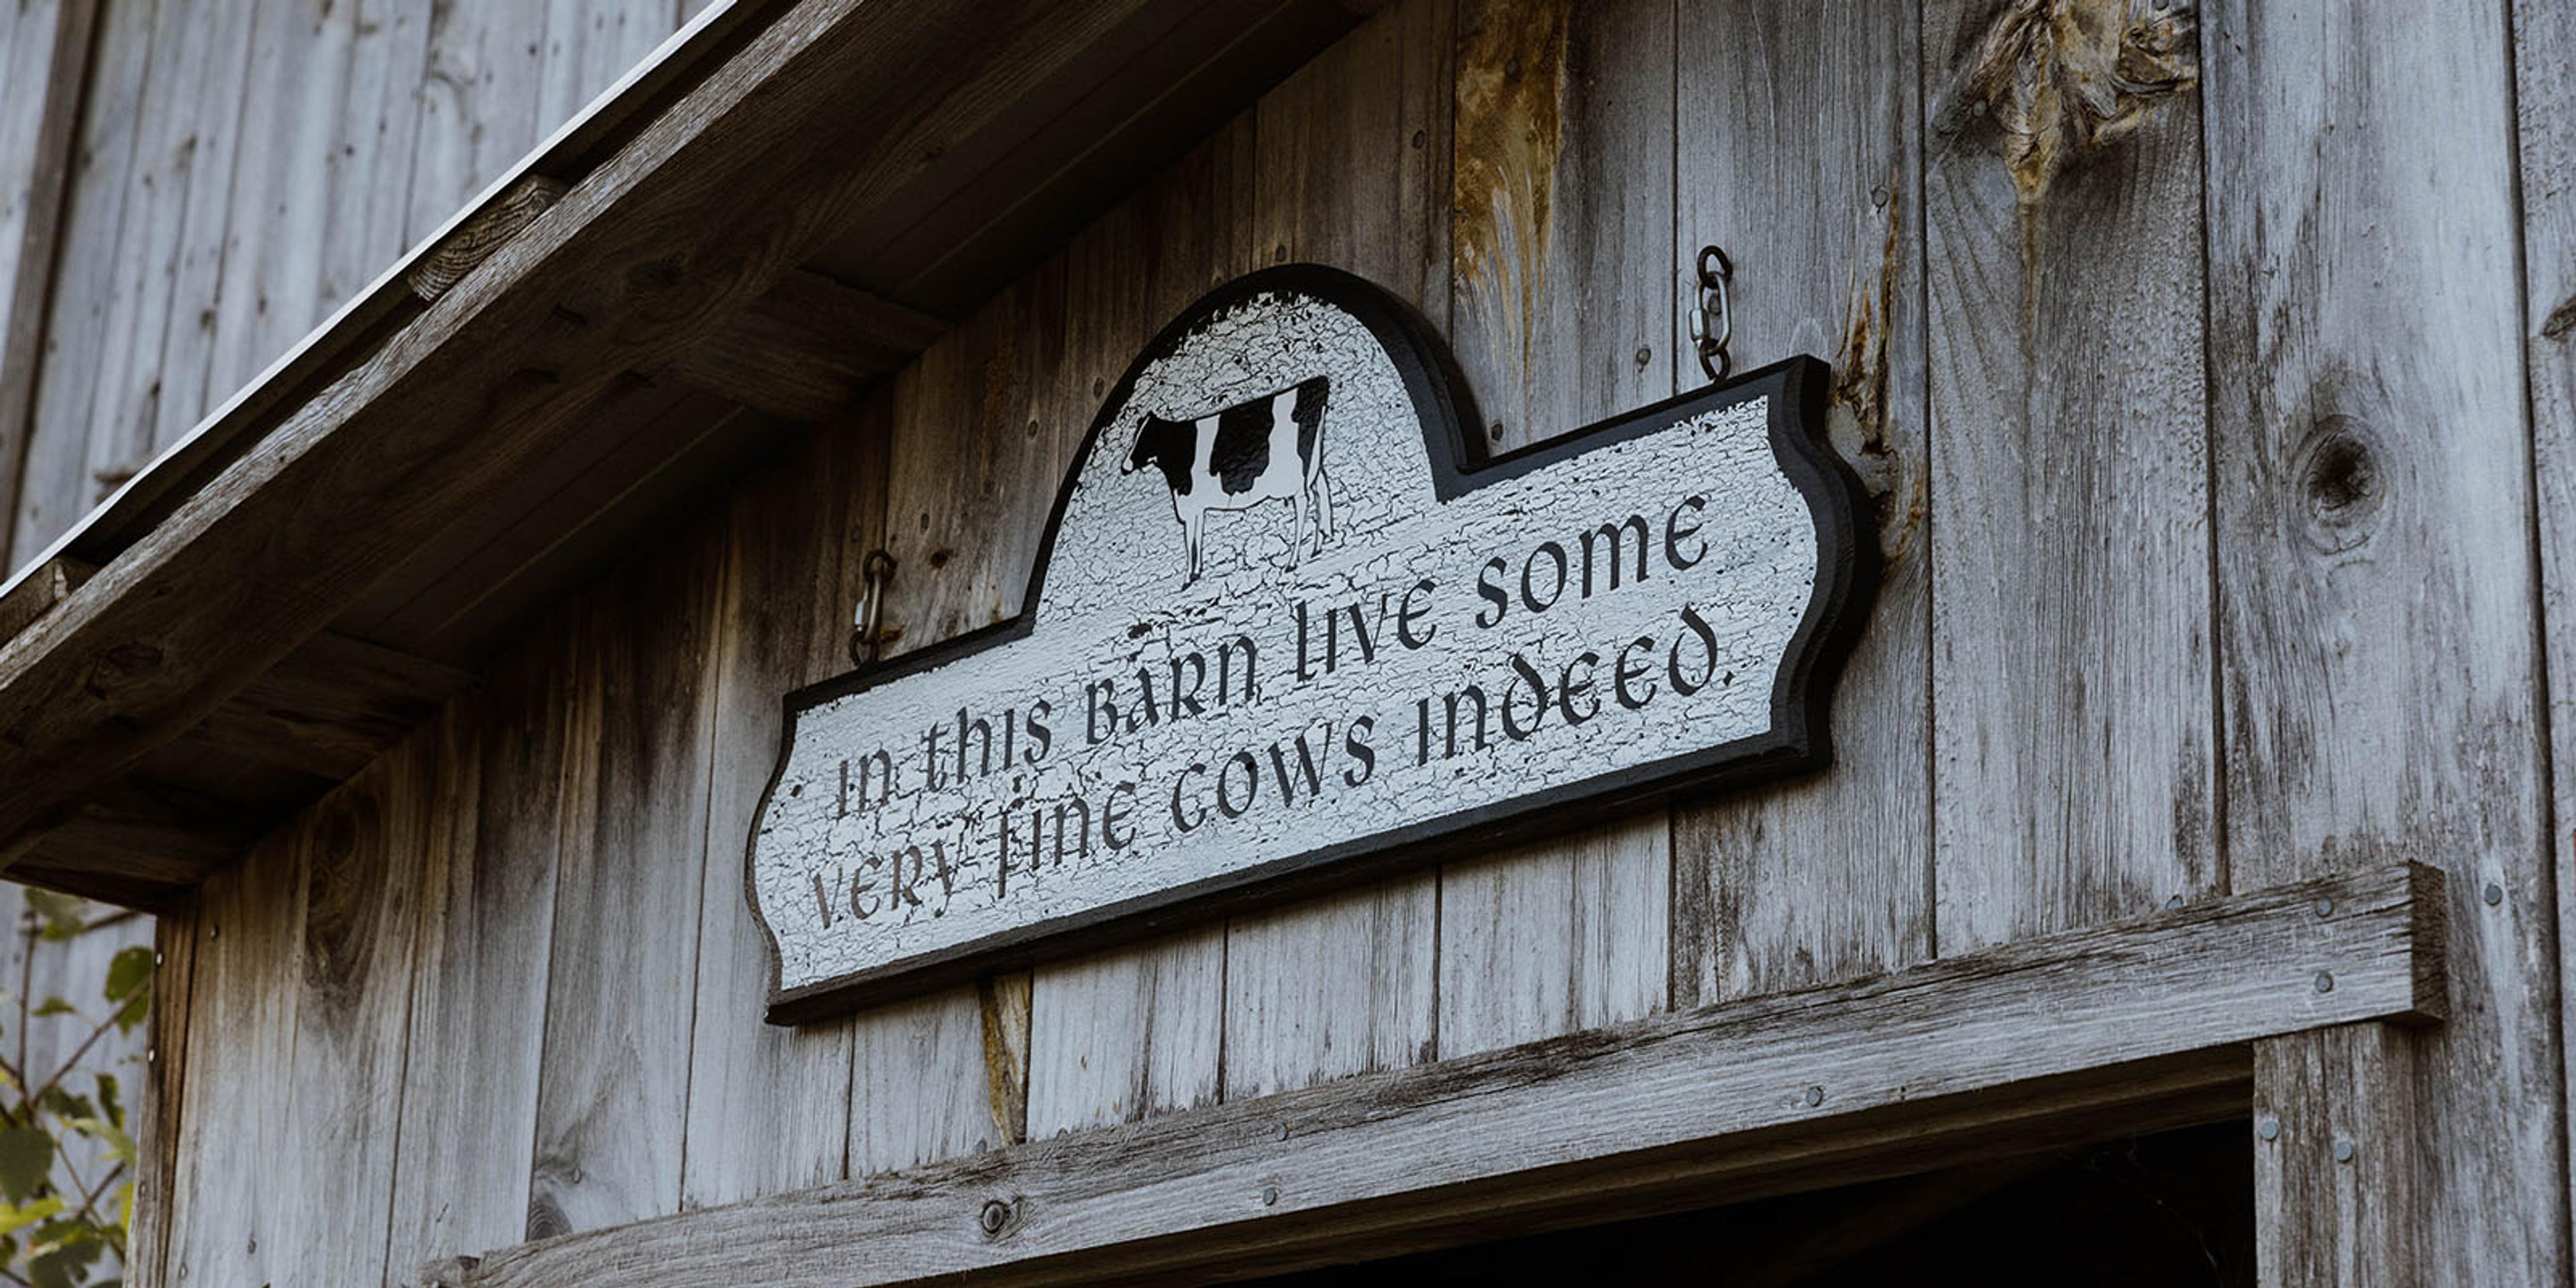 A sign on a barn reads “In this barn live some very fine cows indeed.”